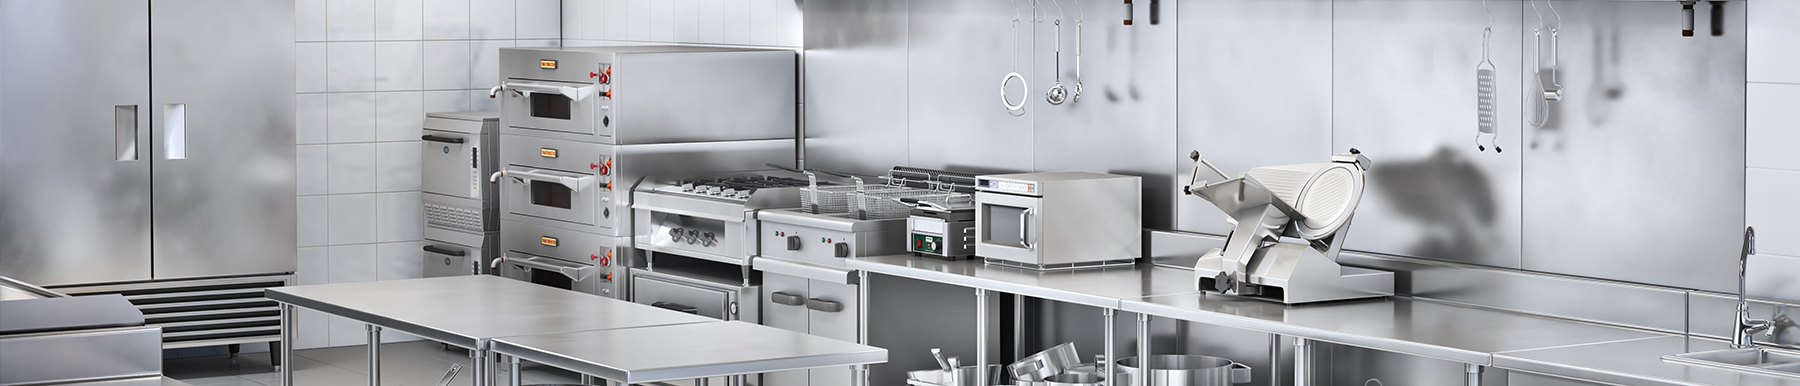 Catering Equipment Suppliers Near North Wiltshire | H2 Catering Equipment Catering Equipment